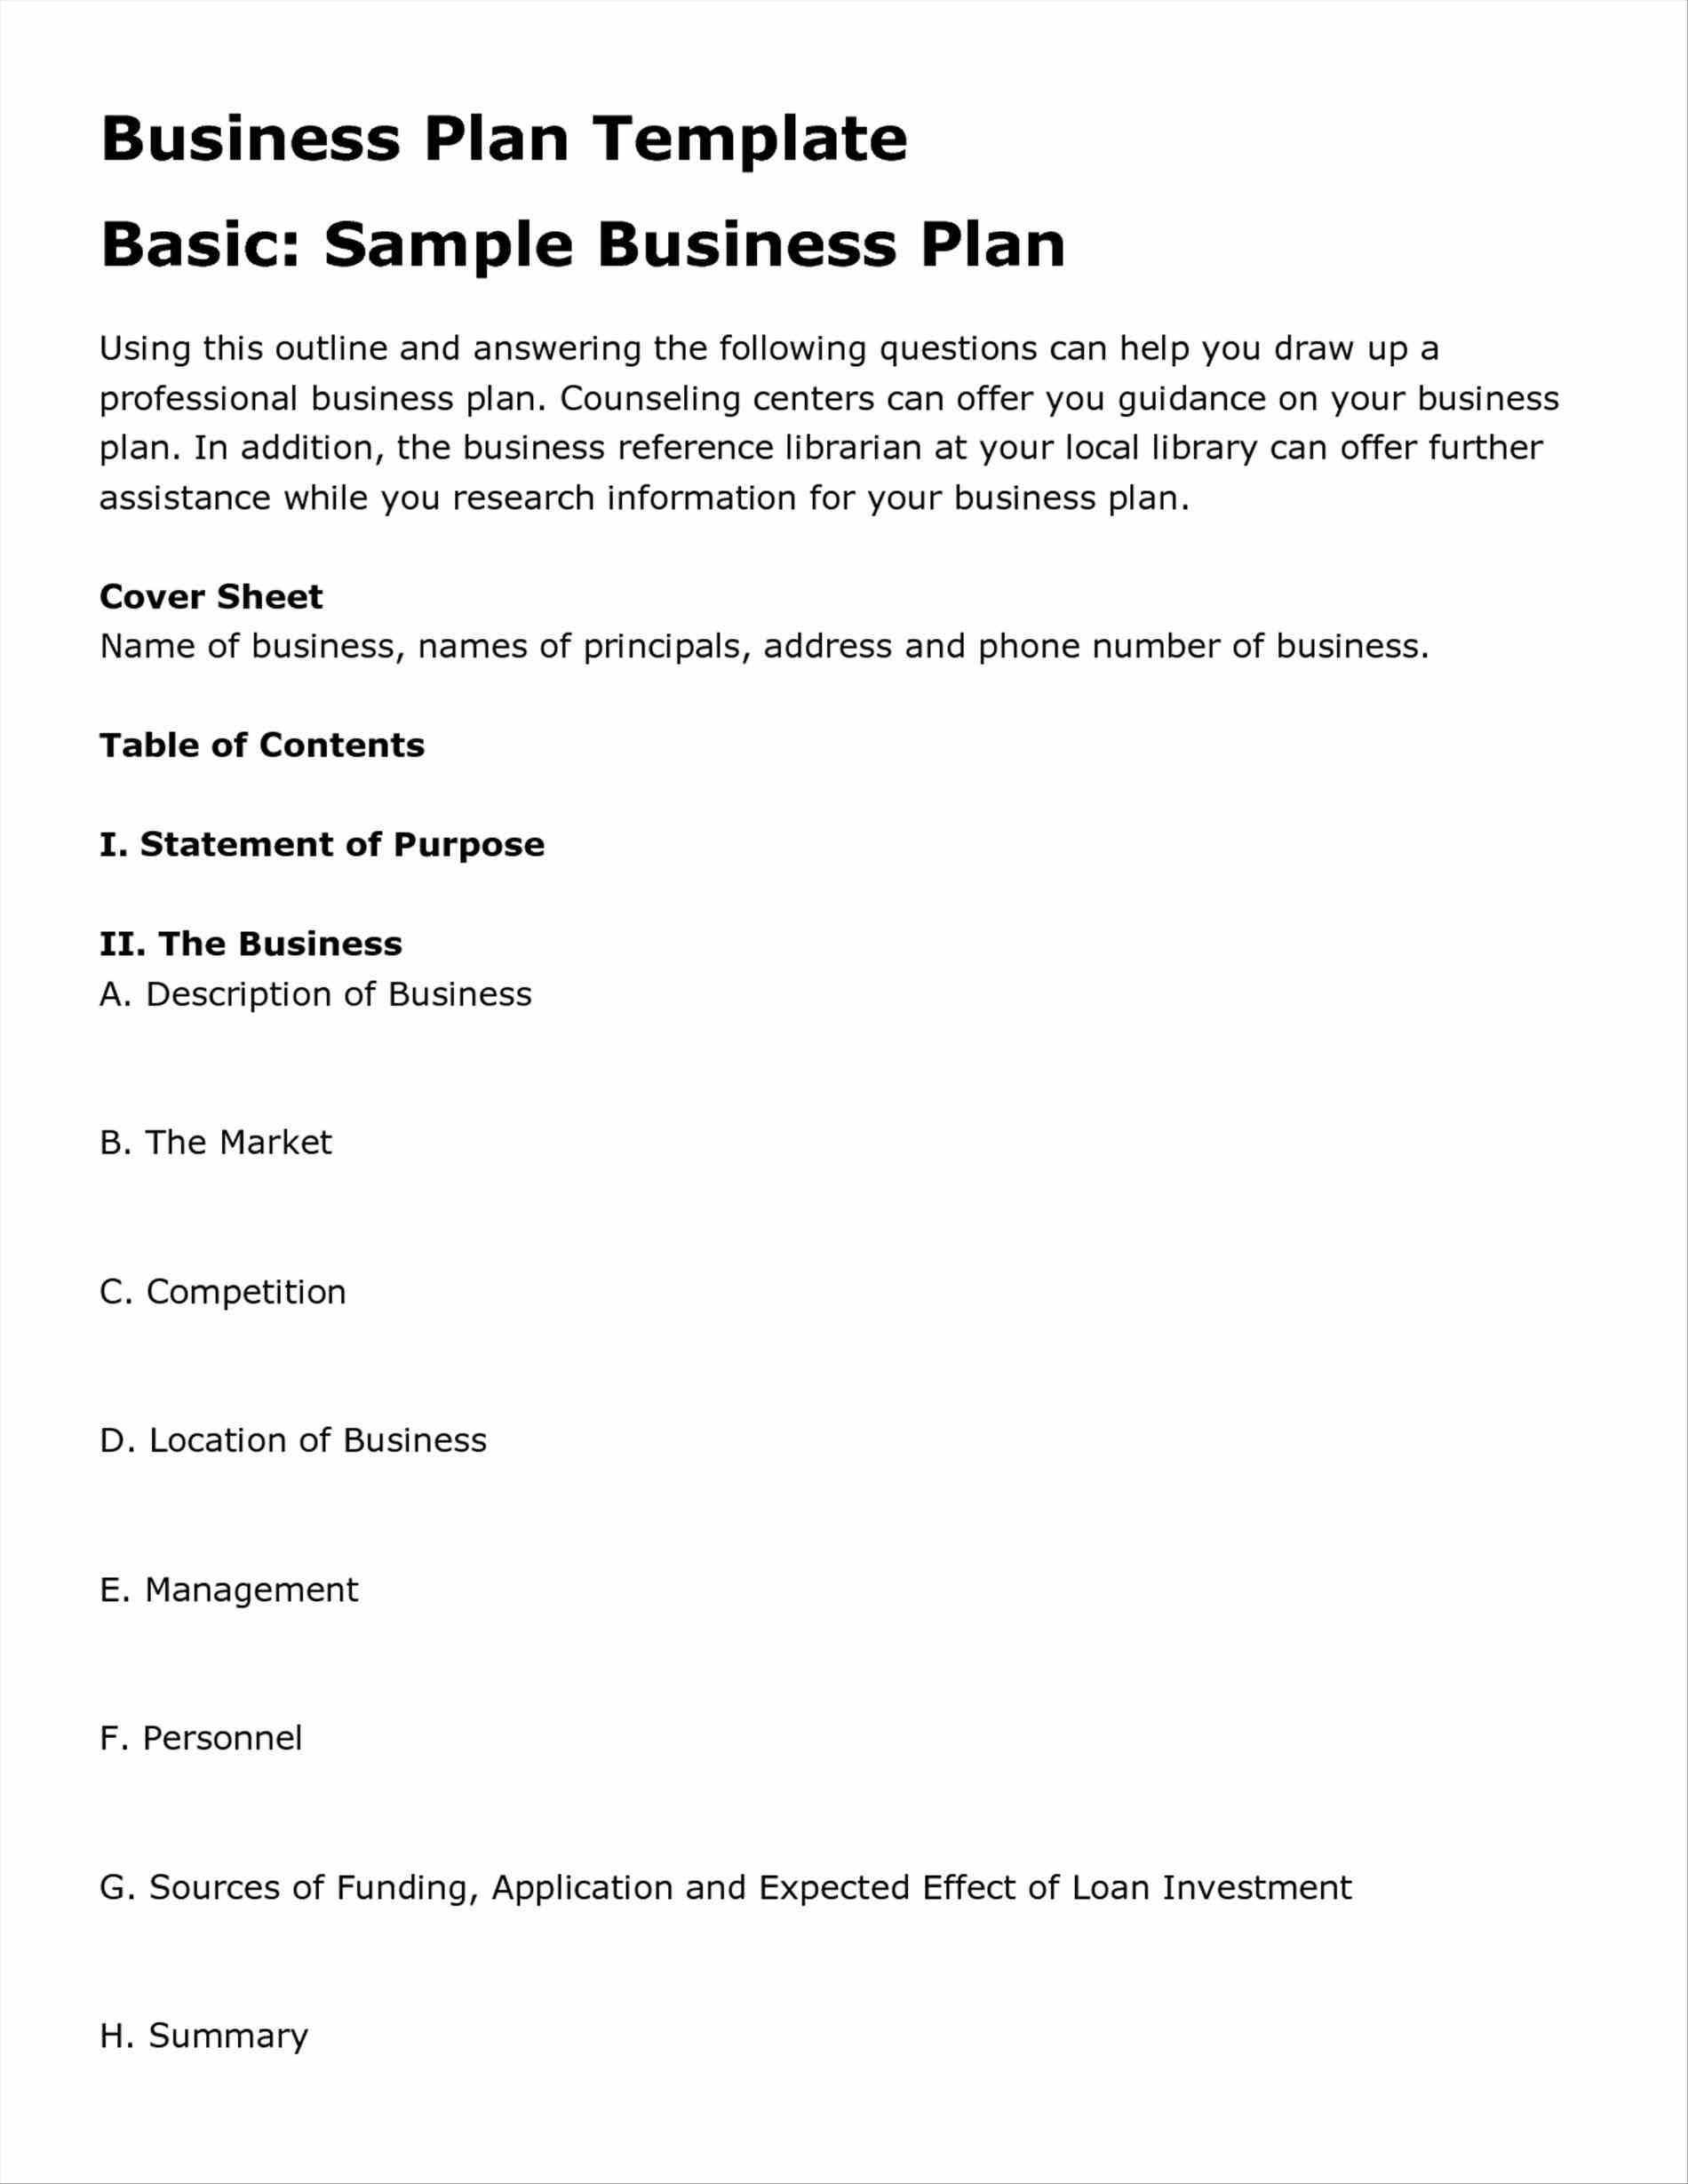 How To Aw Up Business Plan For Restaurant Plans Template Intended For Free Pub Business Plan Template